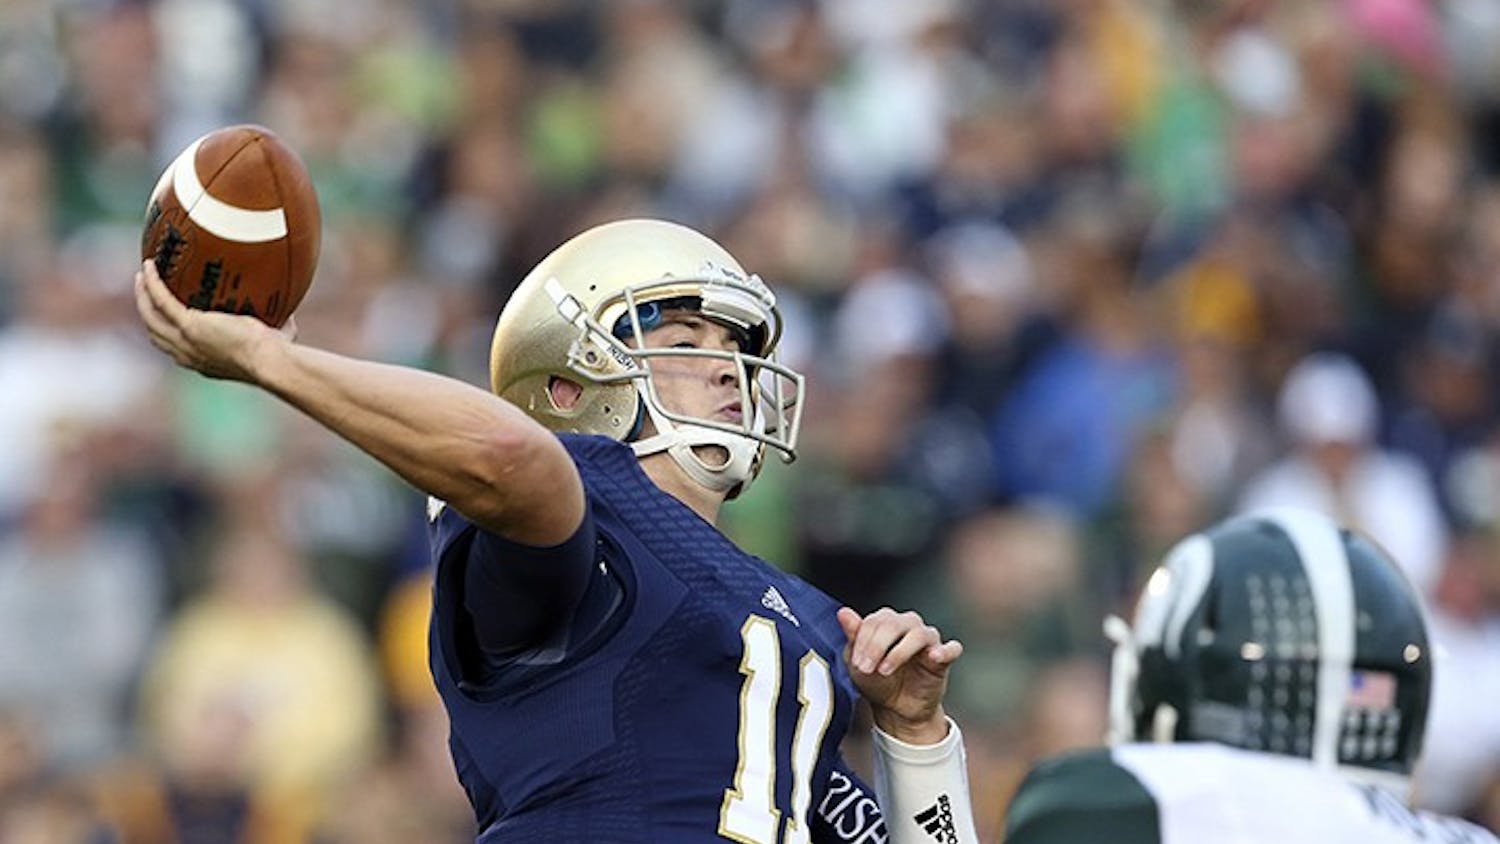 Notre Dame quarterback Tommy Rees (11) throws a pass late in the second half against Michigan State at Notre Dame Stadium in South Bend, Indiana, on Saturday, September 21, 2013. The Fighting Irish won, 17-14. (Nuccio DiNuzzo/Chicago Tribune/MCT)